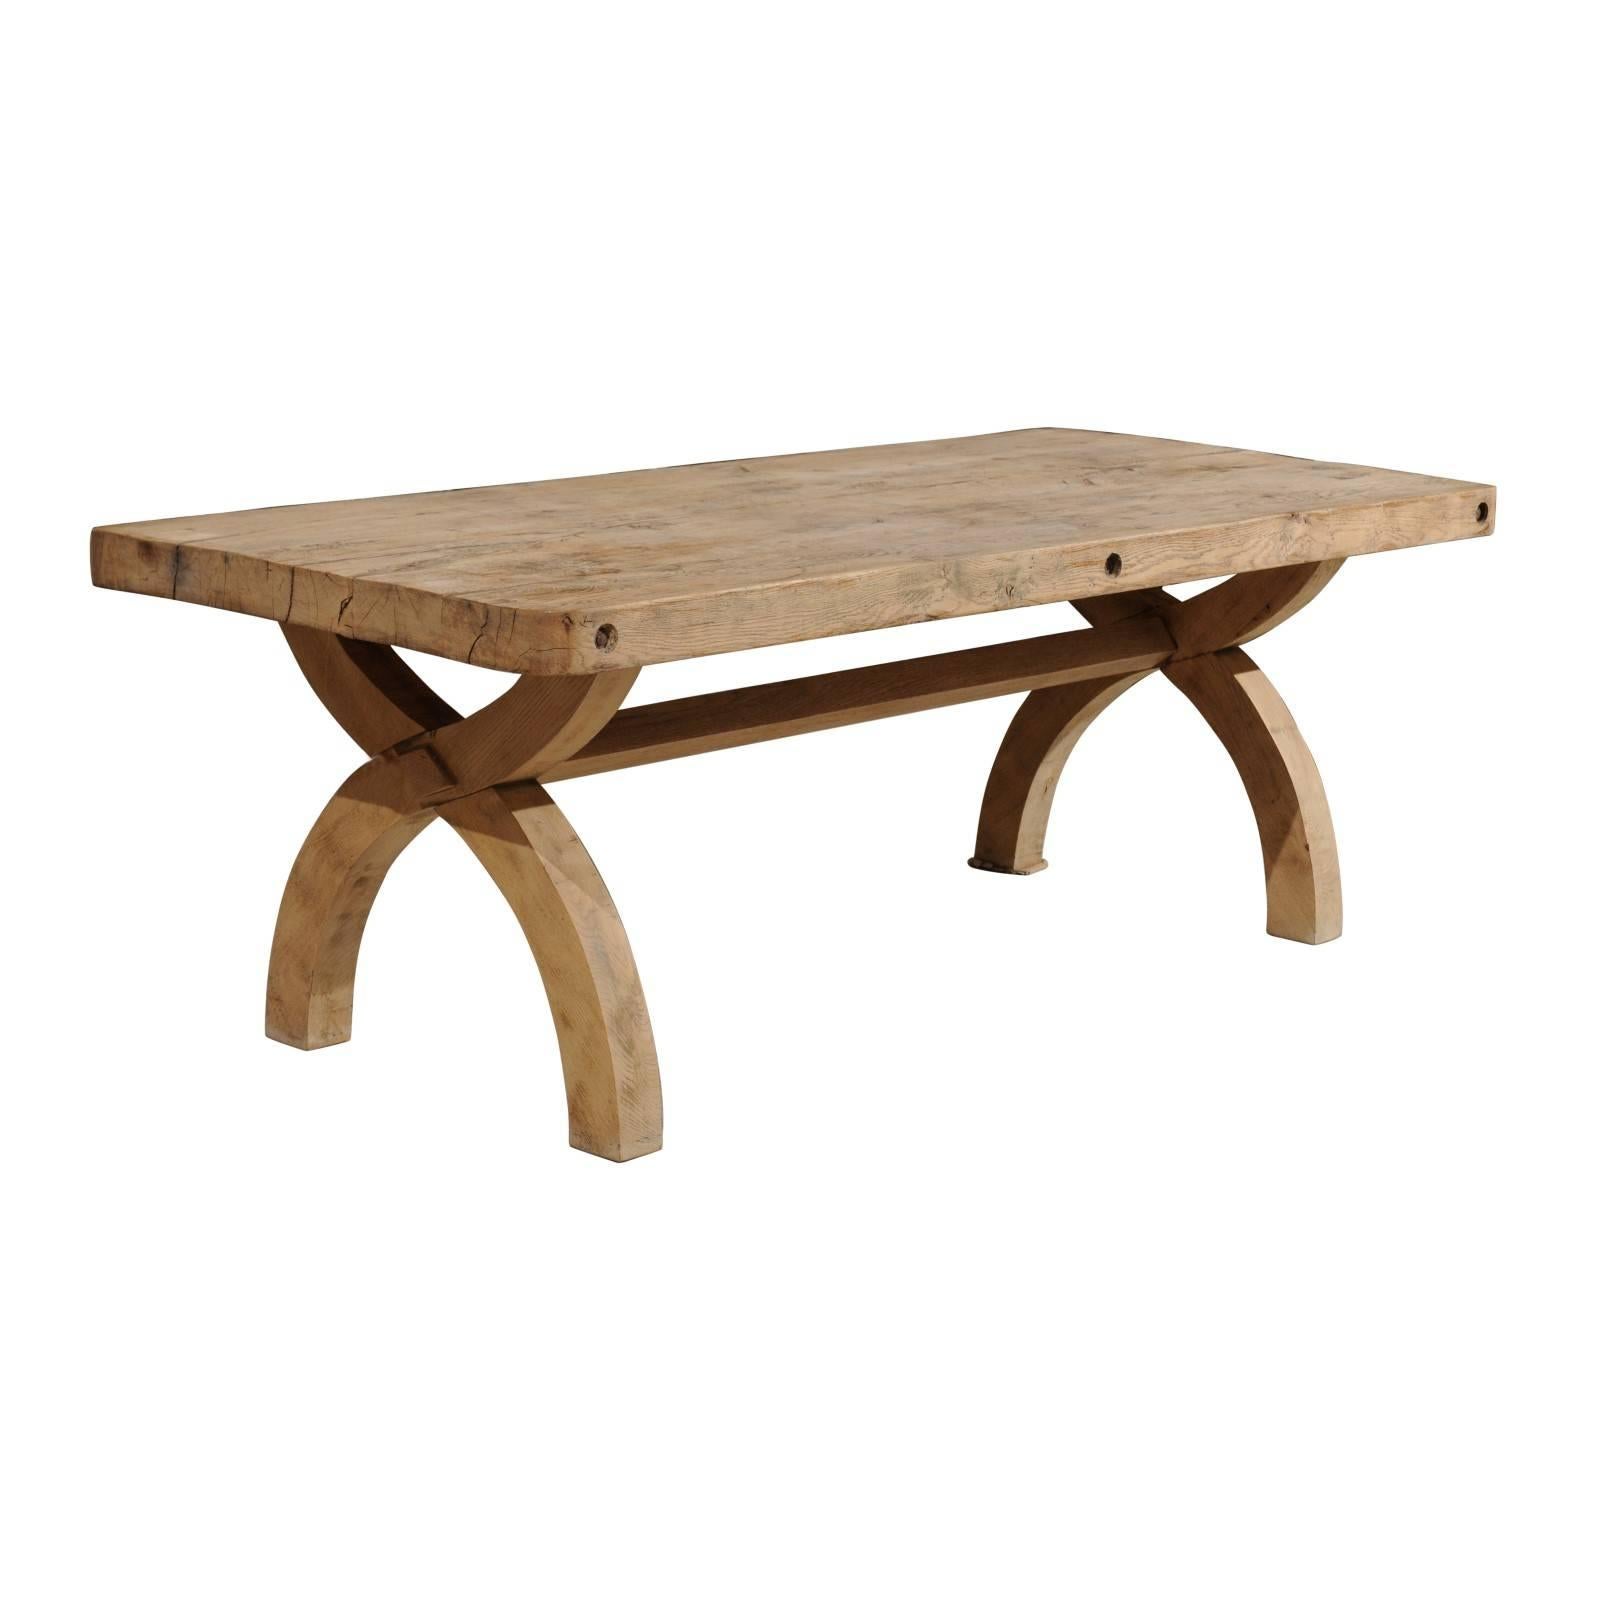 French Alpine Oak Dining Table X-Form Trestle Base from the 19th Century